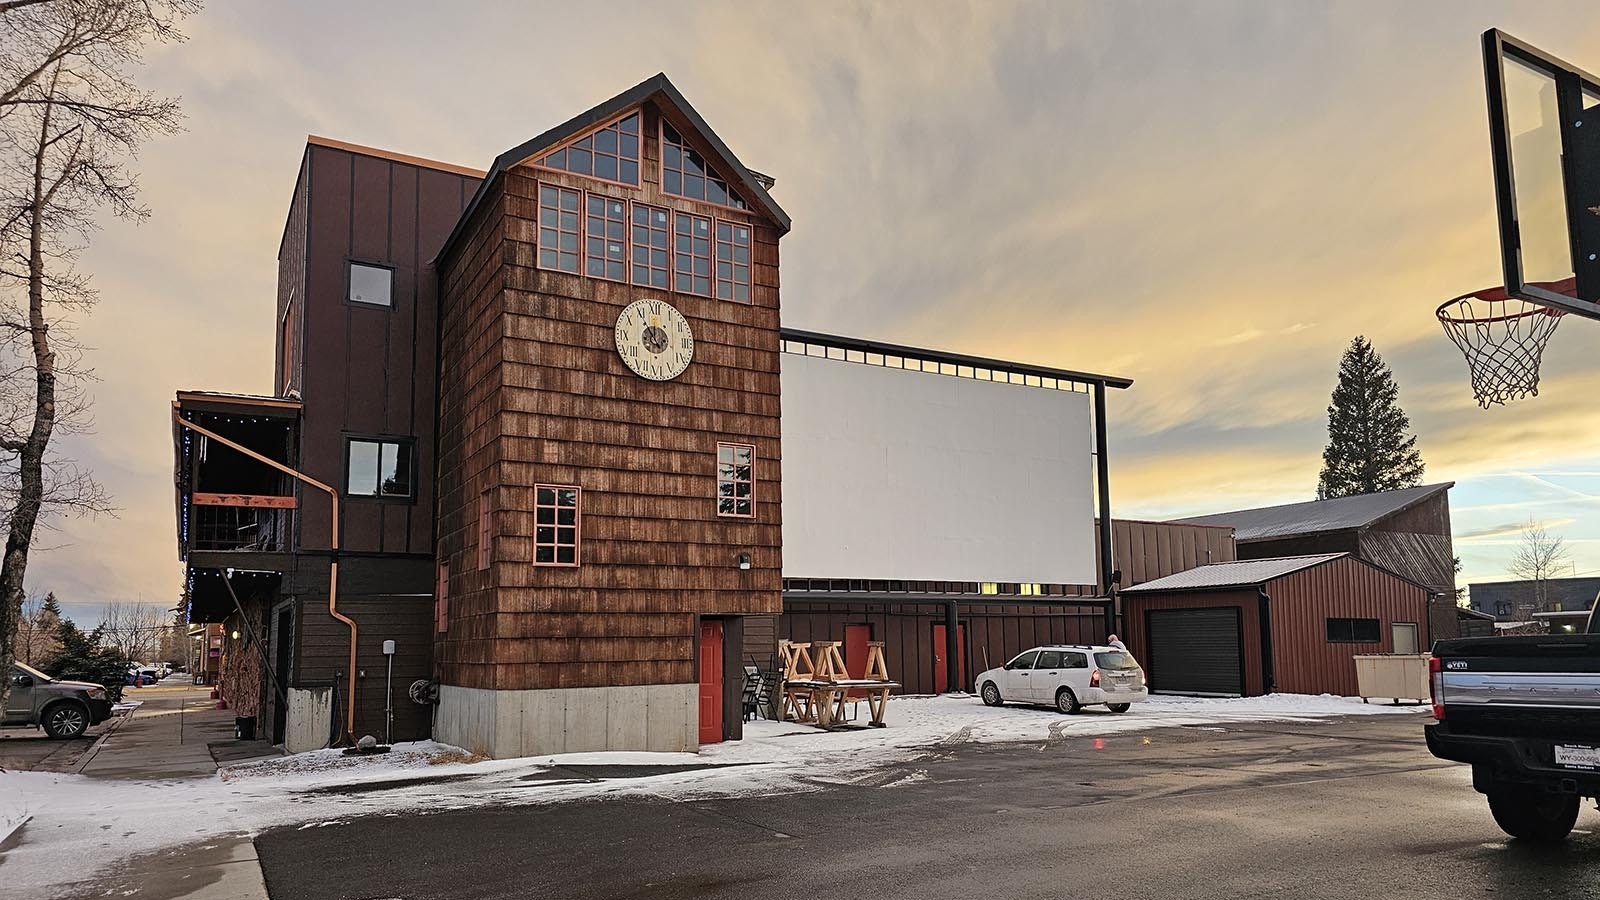 The back of Stockman's Saloon and Steakhouse has been turned into an outdoor movie theater. It's a fun place to be in summer.